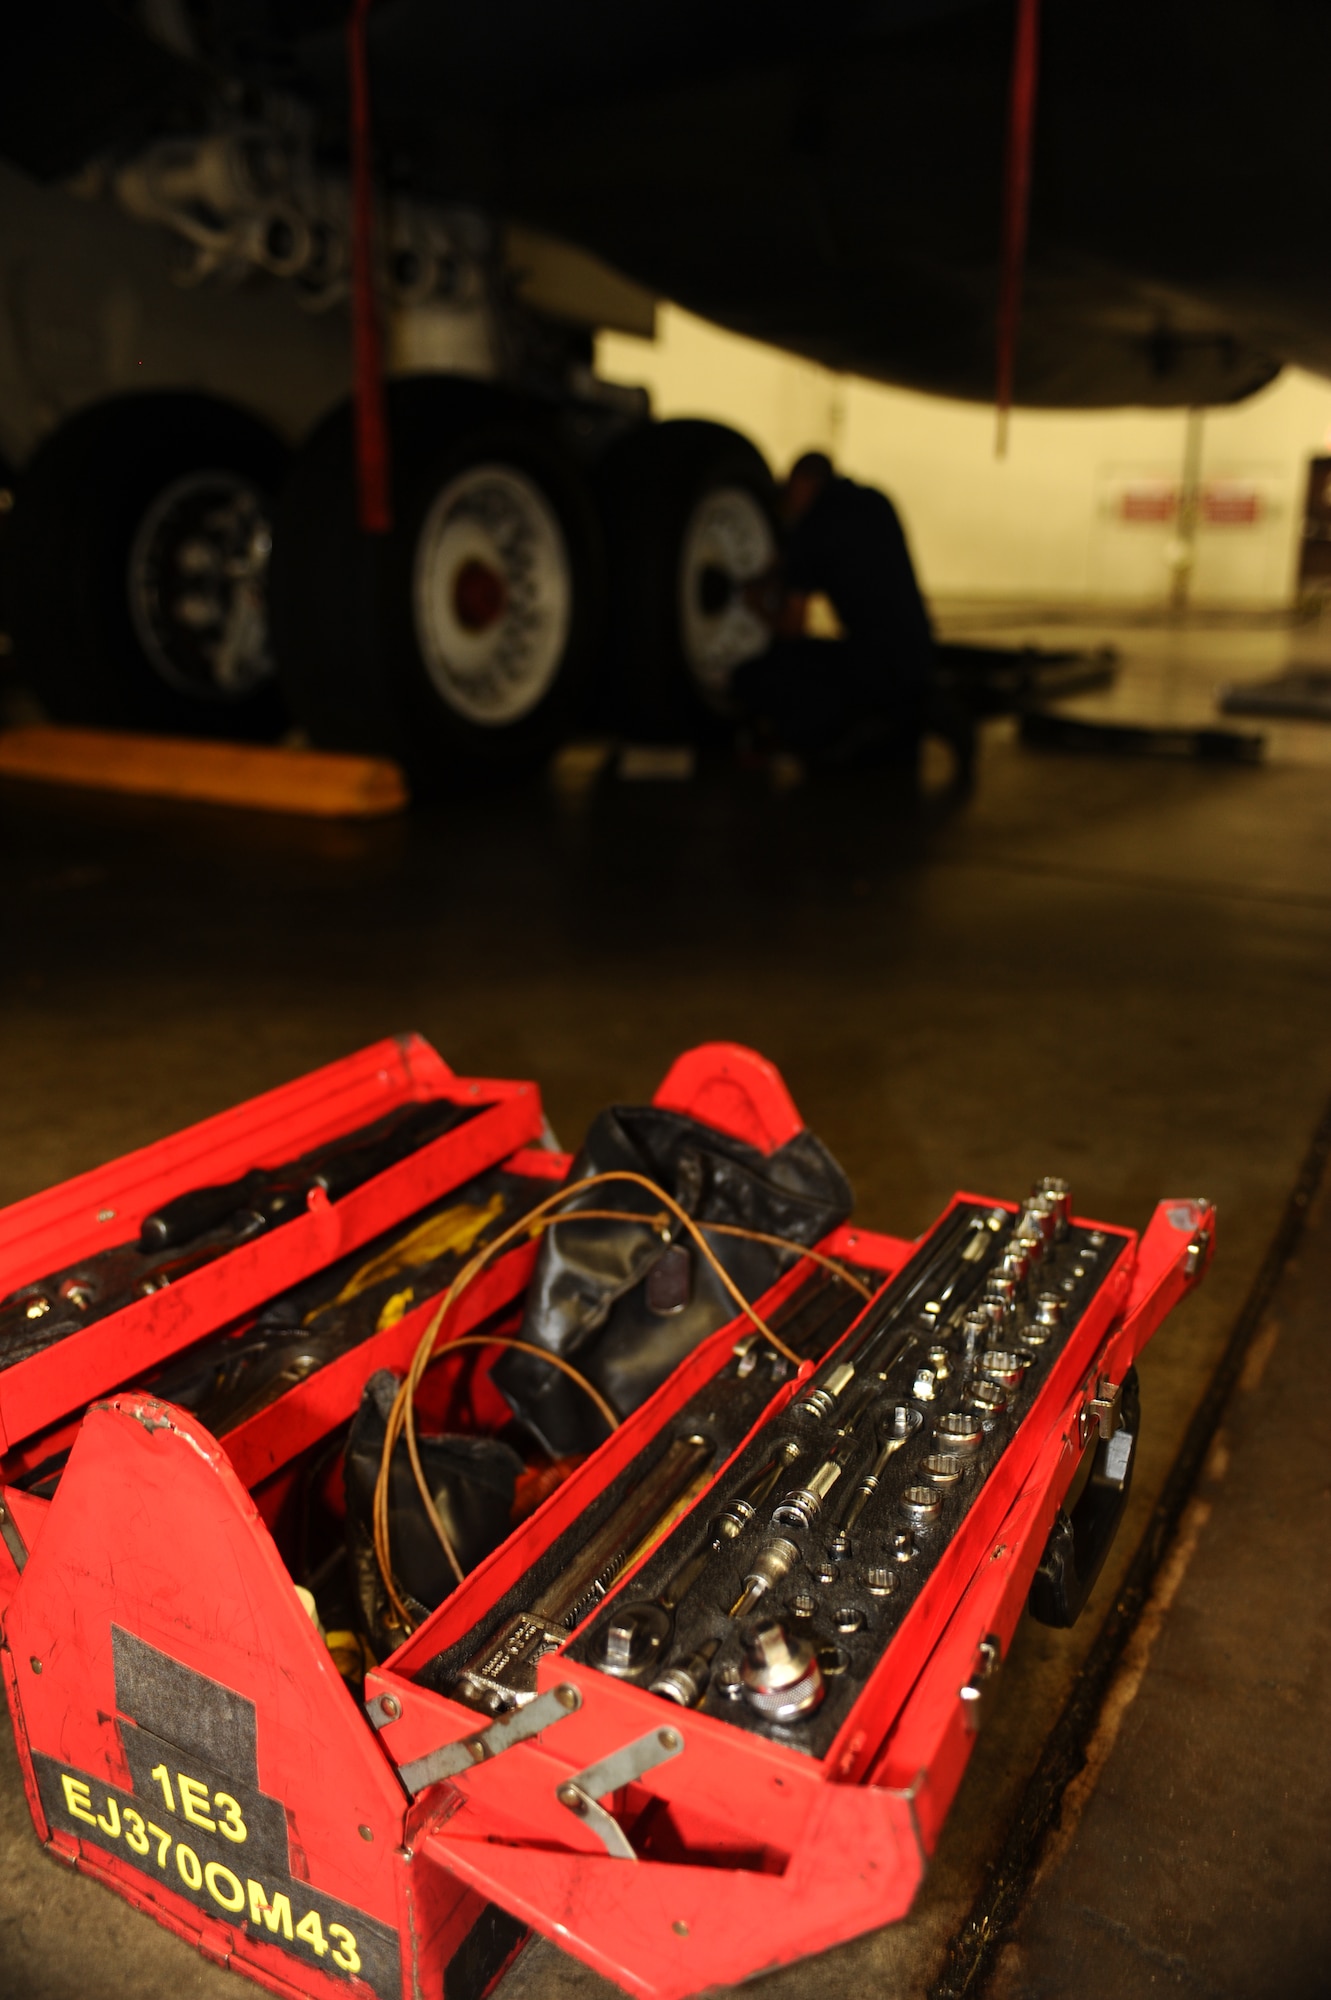 This tool kit contains equipment to service Ellsworth’s B-1B Lancers here, August 19. Maintainers fine-tune the B-1s 24 hours a day to ensure flight capabilities. (U.S. Air Force photo/Senior Airman Kasey Zickmund)